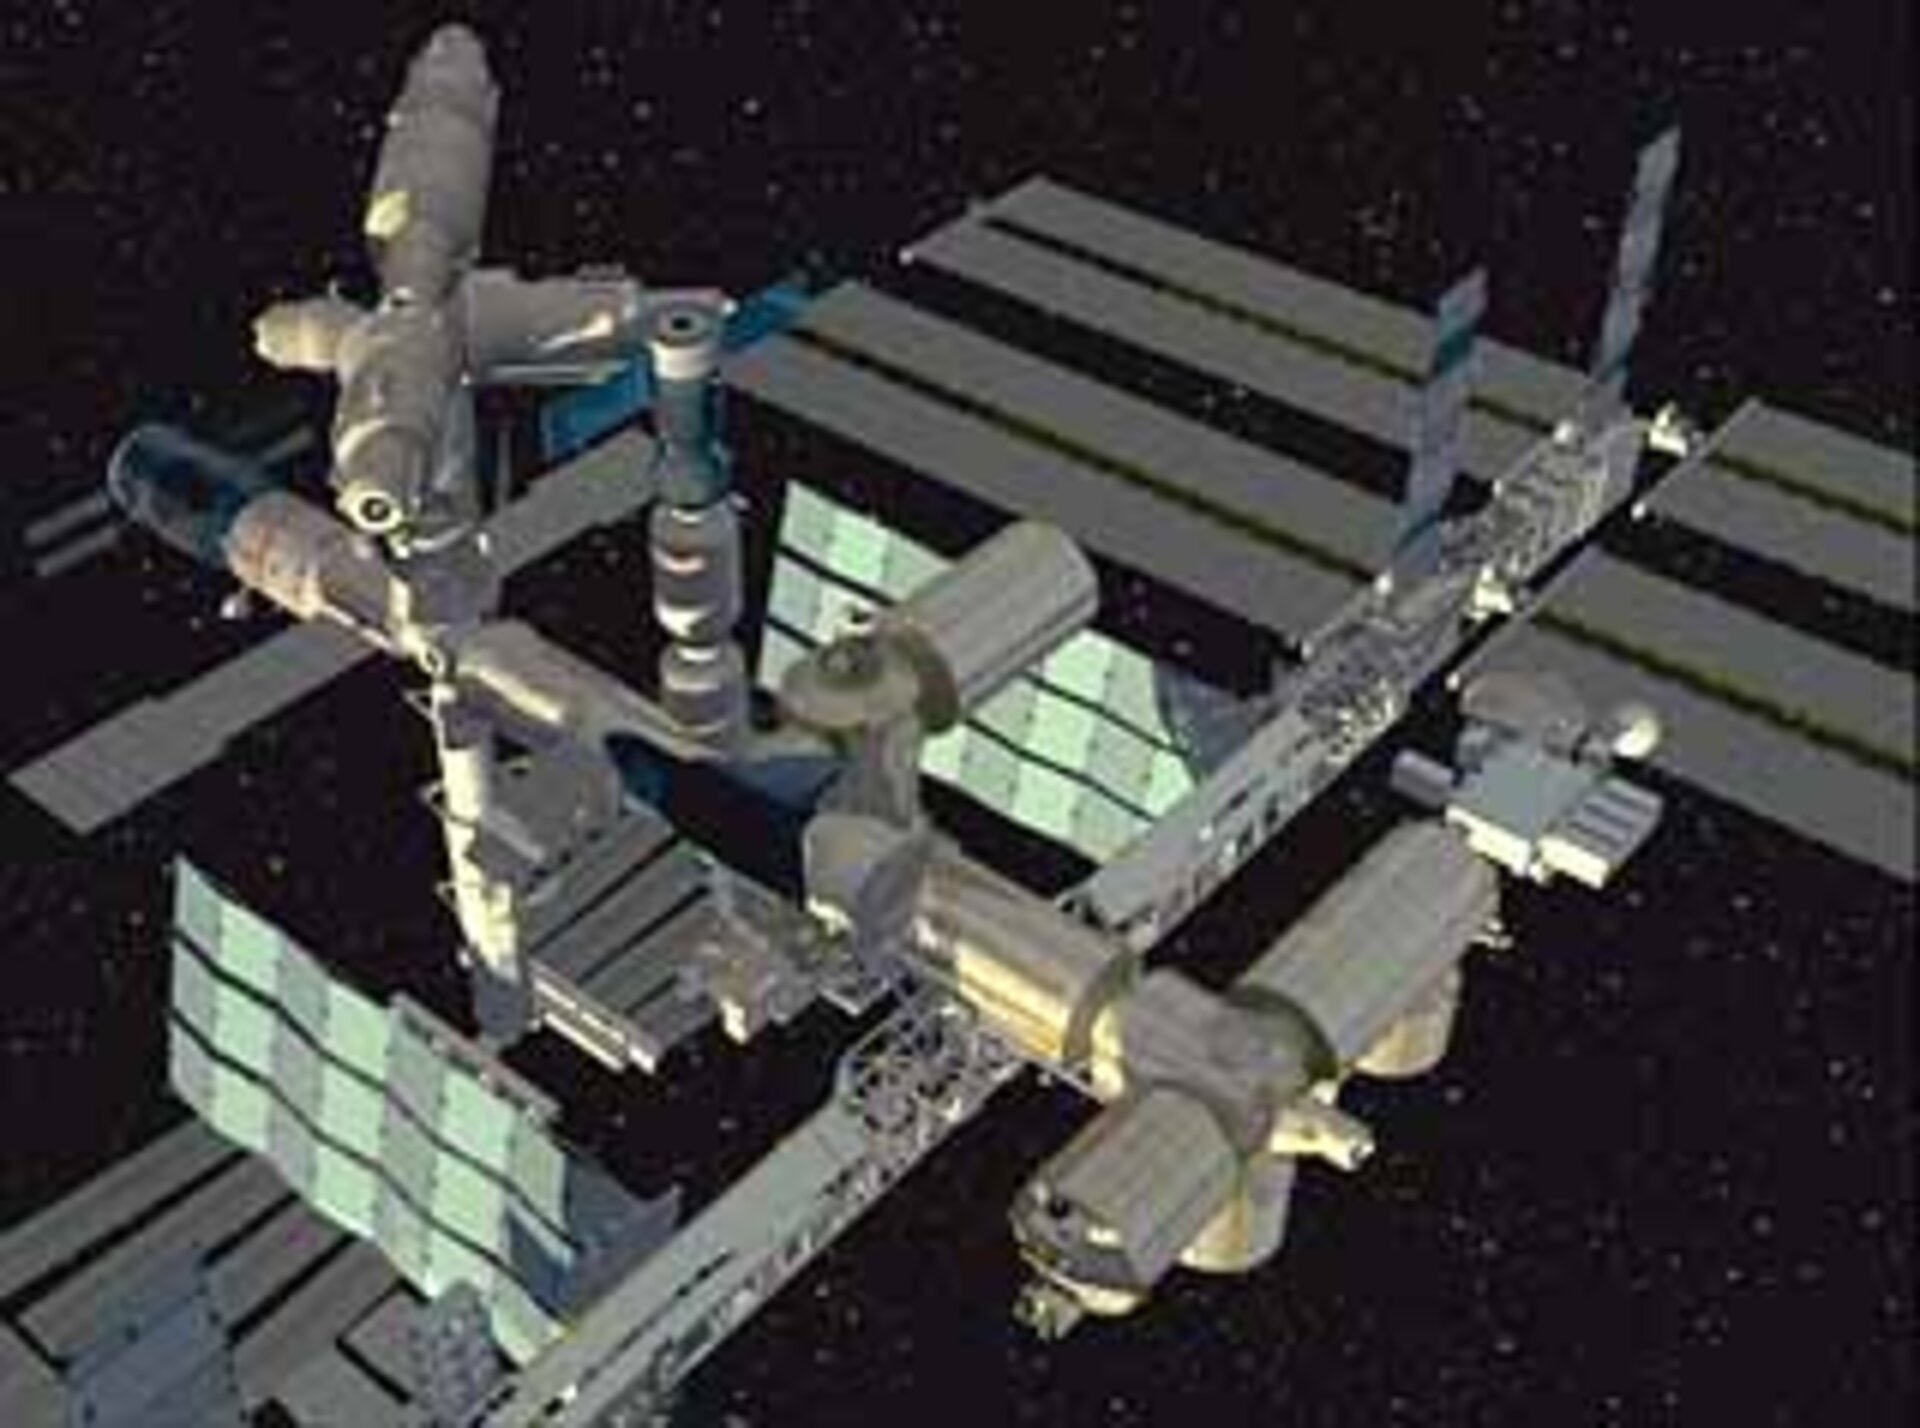 Artist's impression of the completed ISS